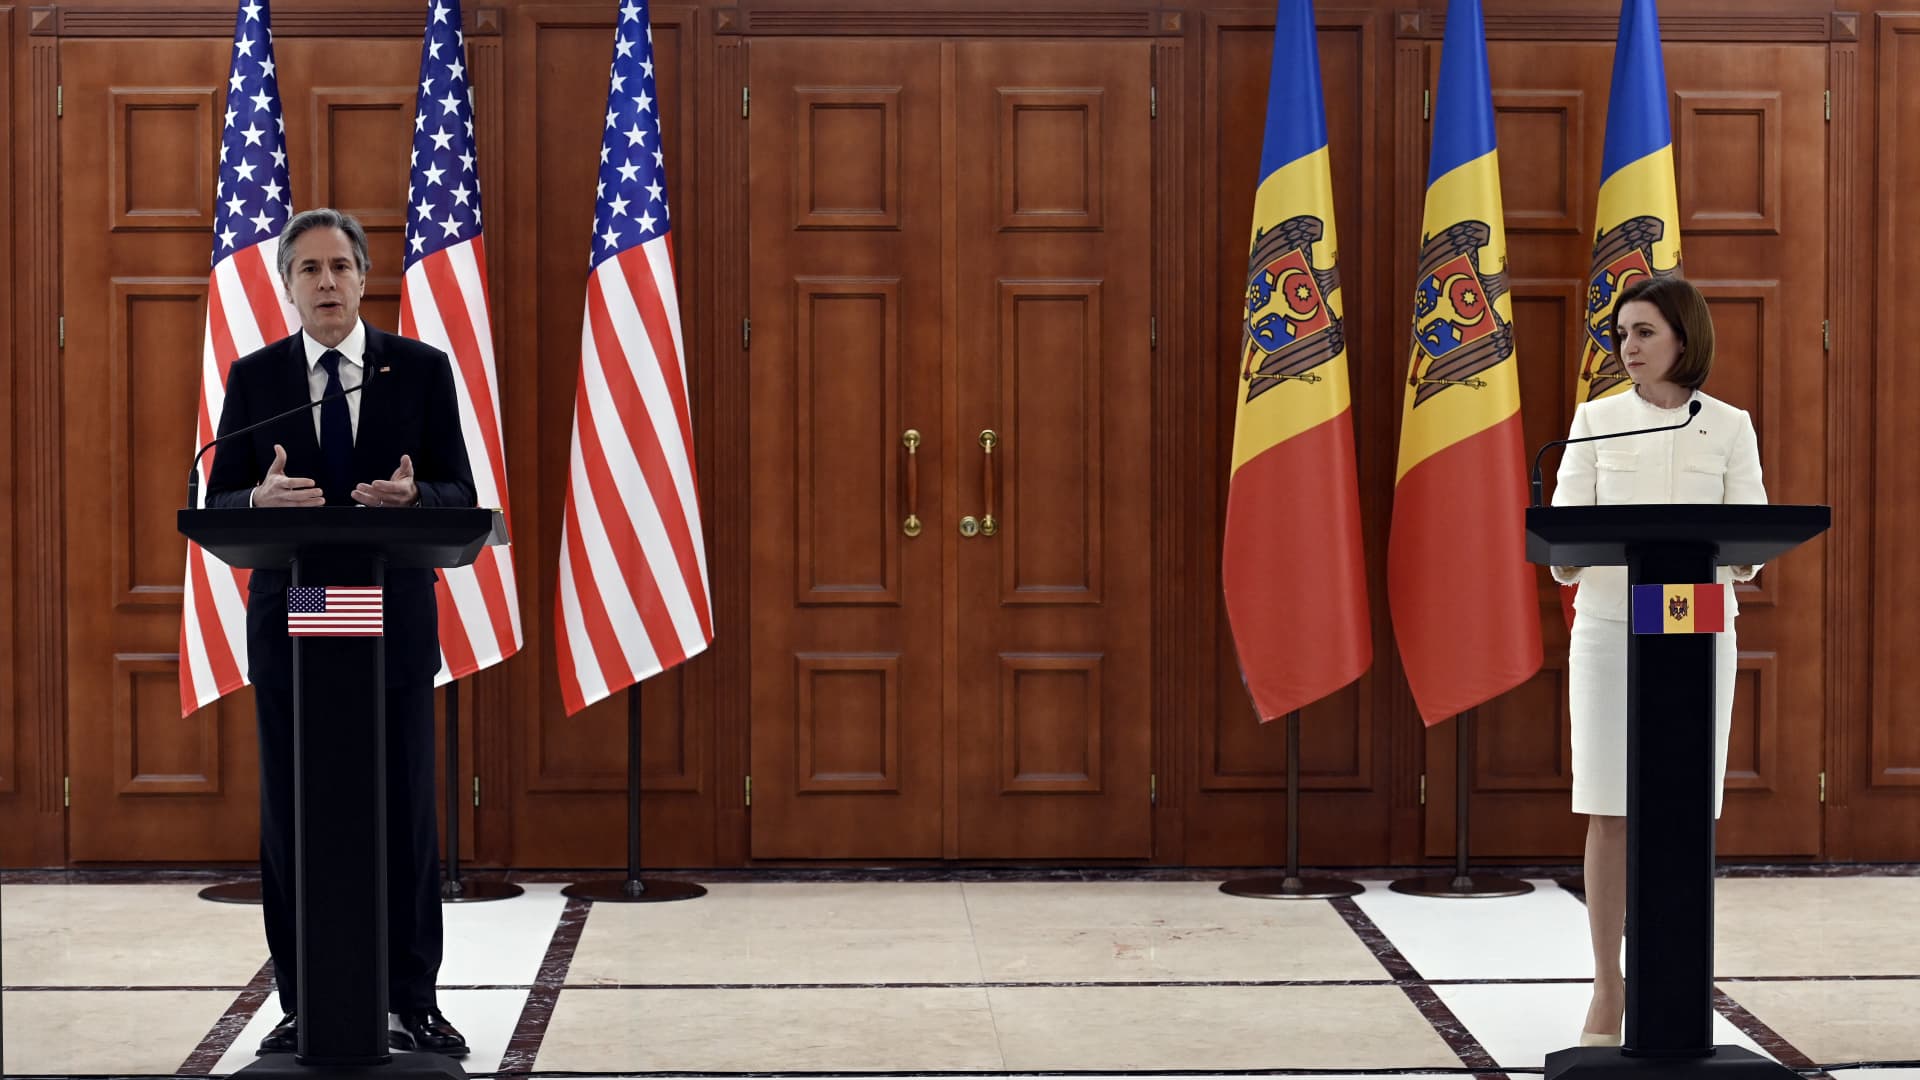 US Secretary of State Antony Blinkenand Moldovan President Maia Sandu speak during a press conference at The Presidential Palace in Chisinau, on March 6, 2022.